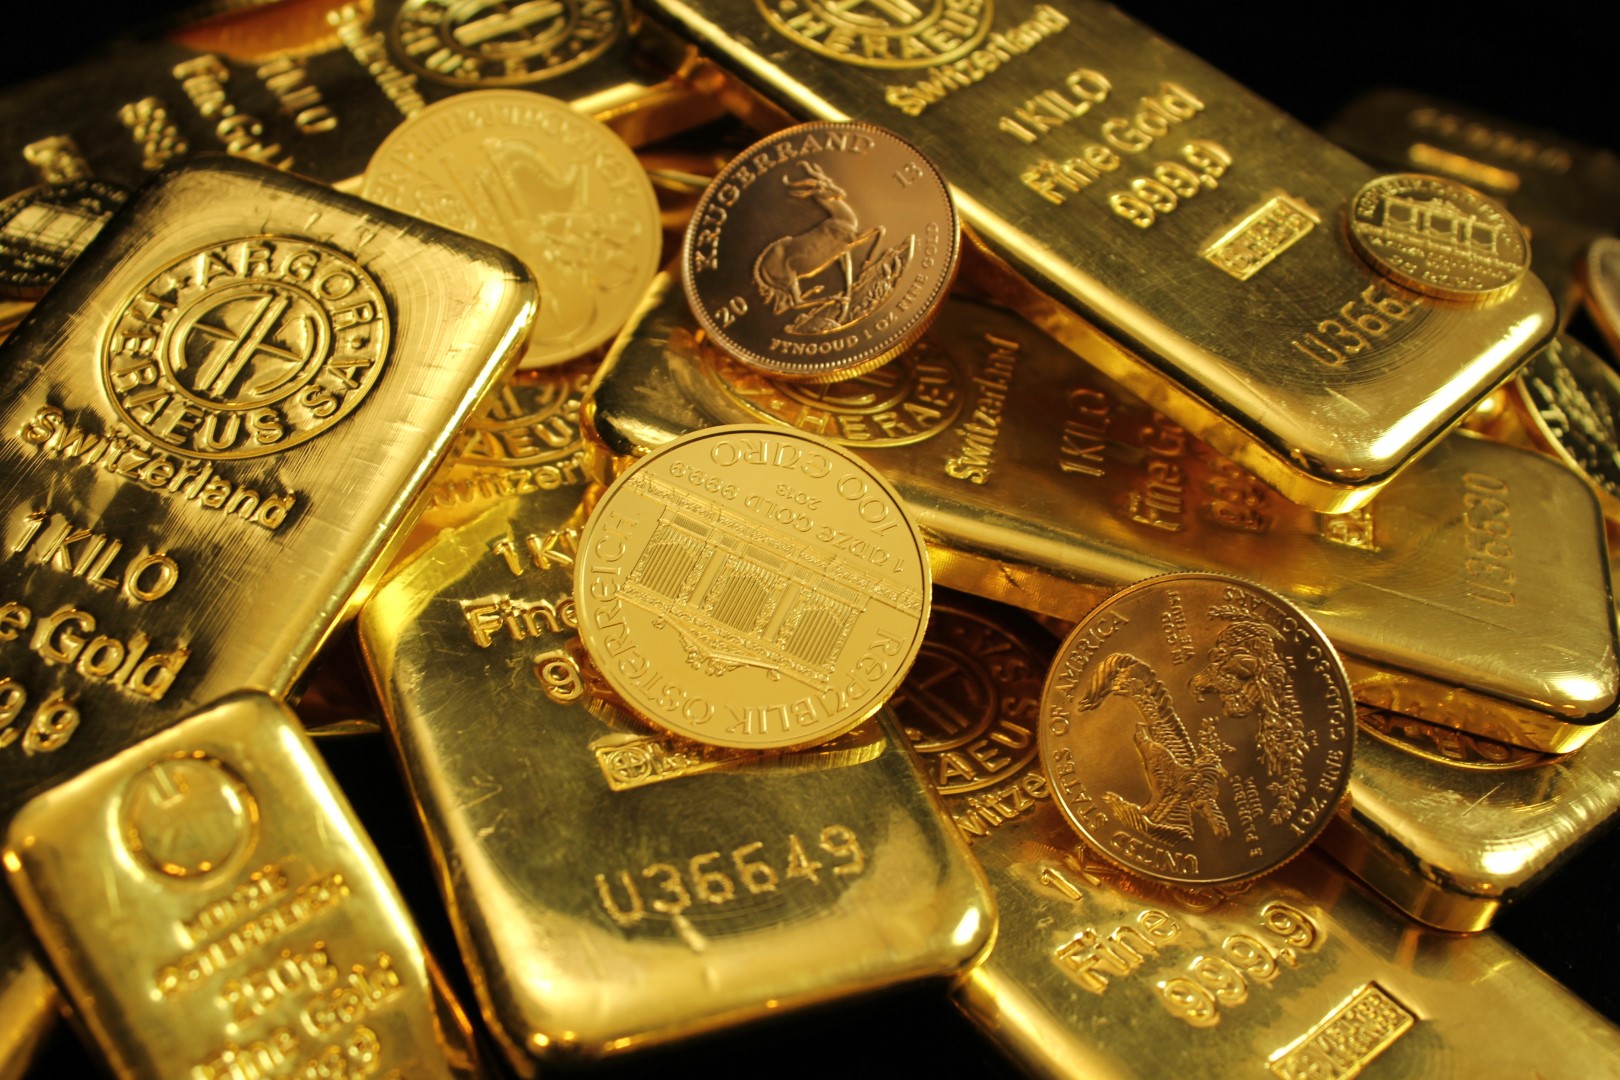 <p>This article will help investors know what to look for when choosing a gold mutual fund to take exposure to gold as a part of their portfolio.</p>

